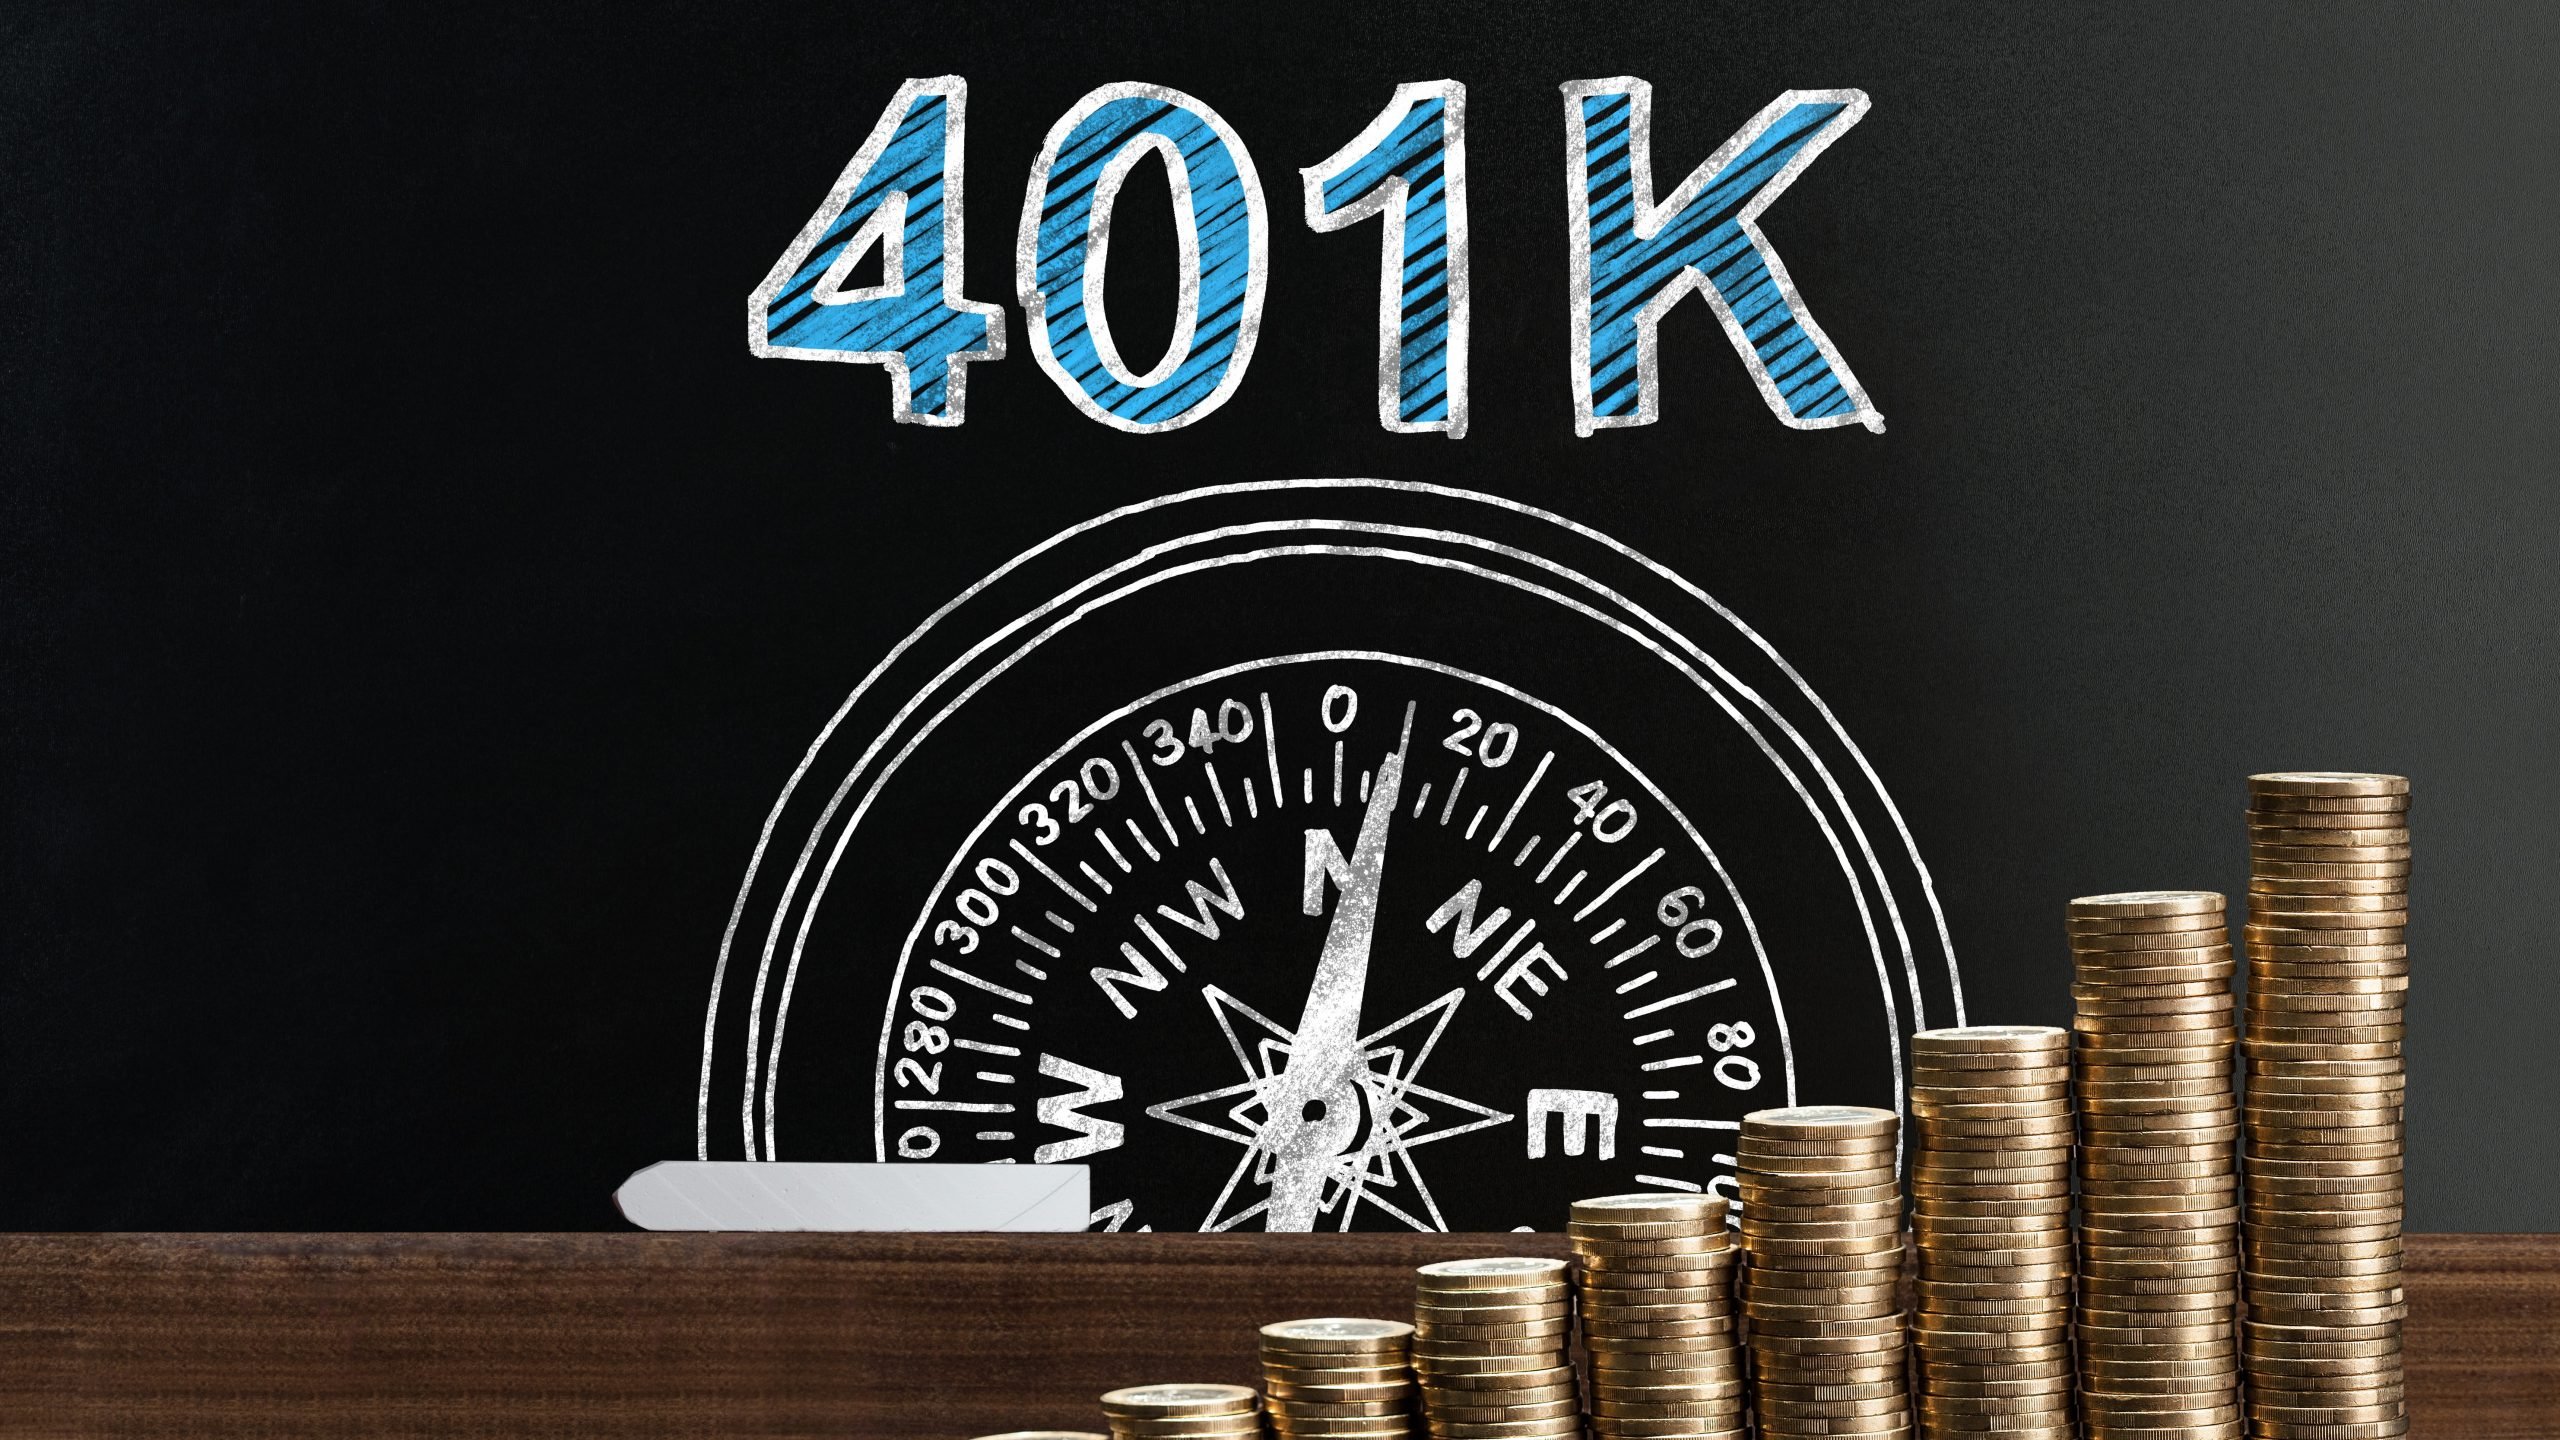 Blue 401k text on black background, with several stacks of coins of increasing height (401k to cryptocurrency).